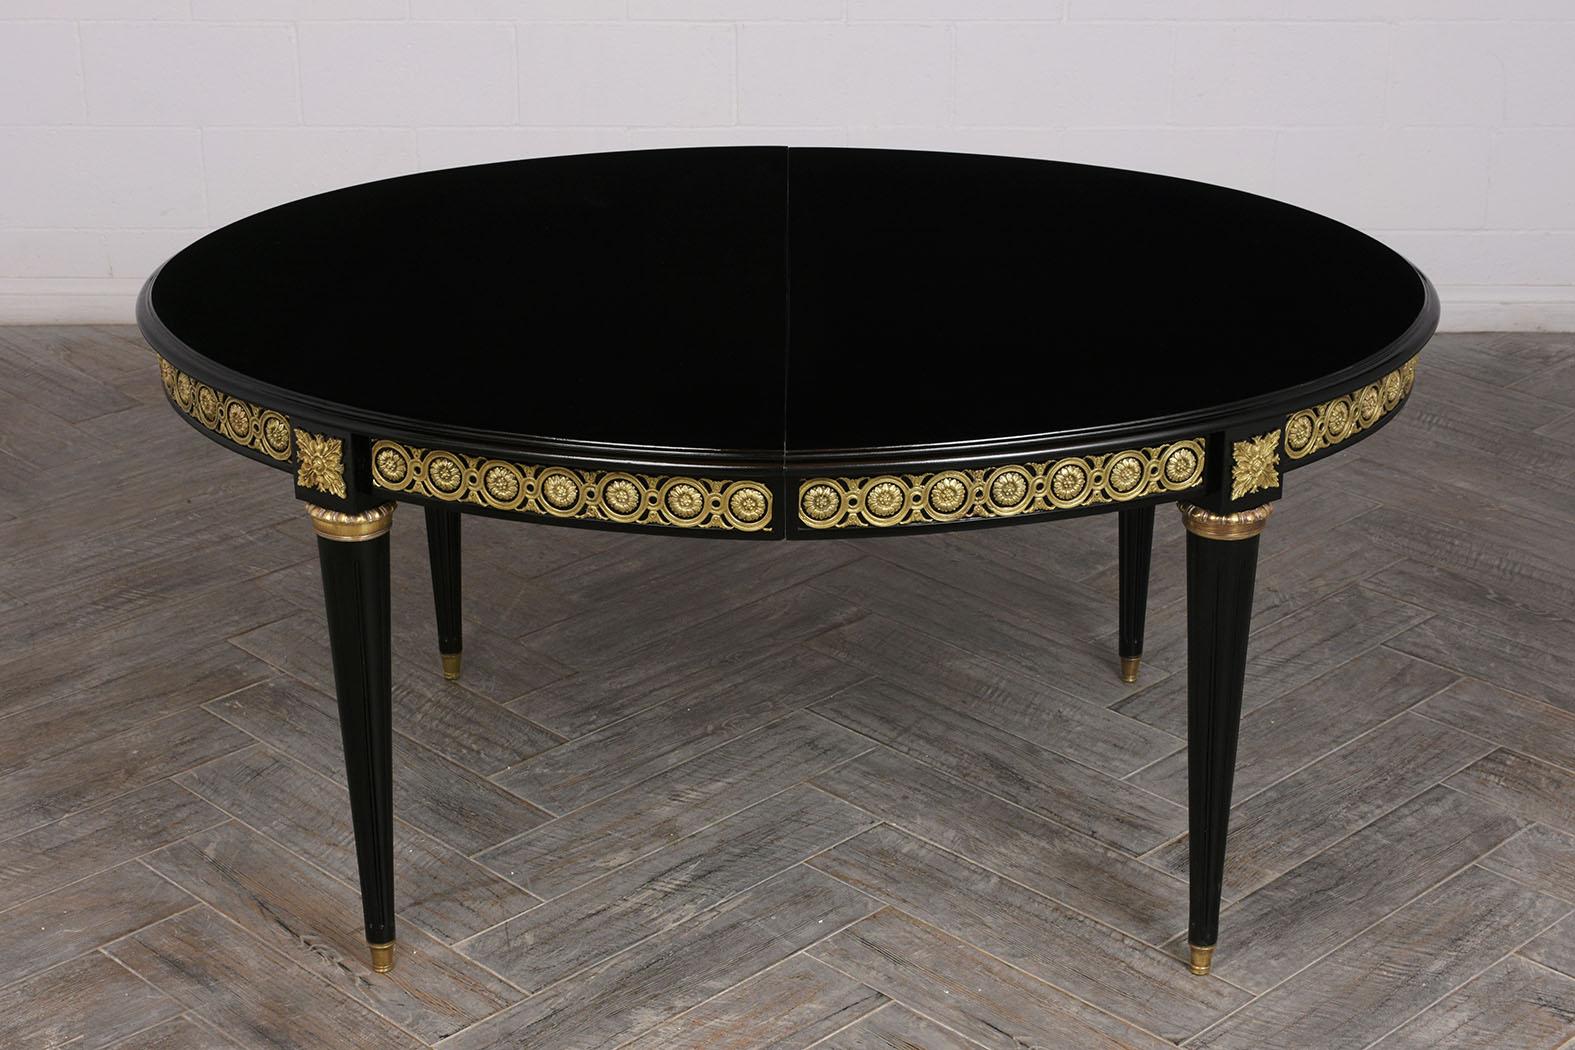 This 1930s French Louis XVI style dining table is made of mahogany wood ebonized in a rich black color with a lacquered finish. The oval shaped table is elegantly adorned with brass accents along the edge. The carved legs feature fluted details and